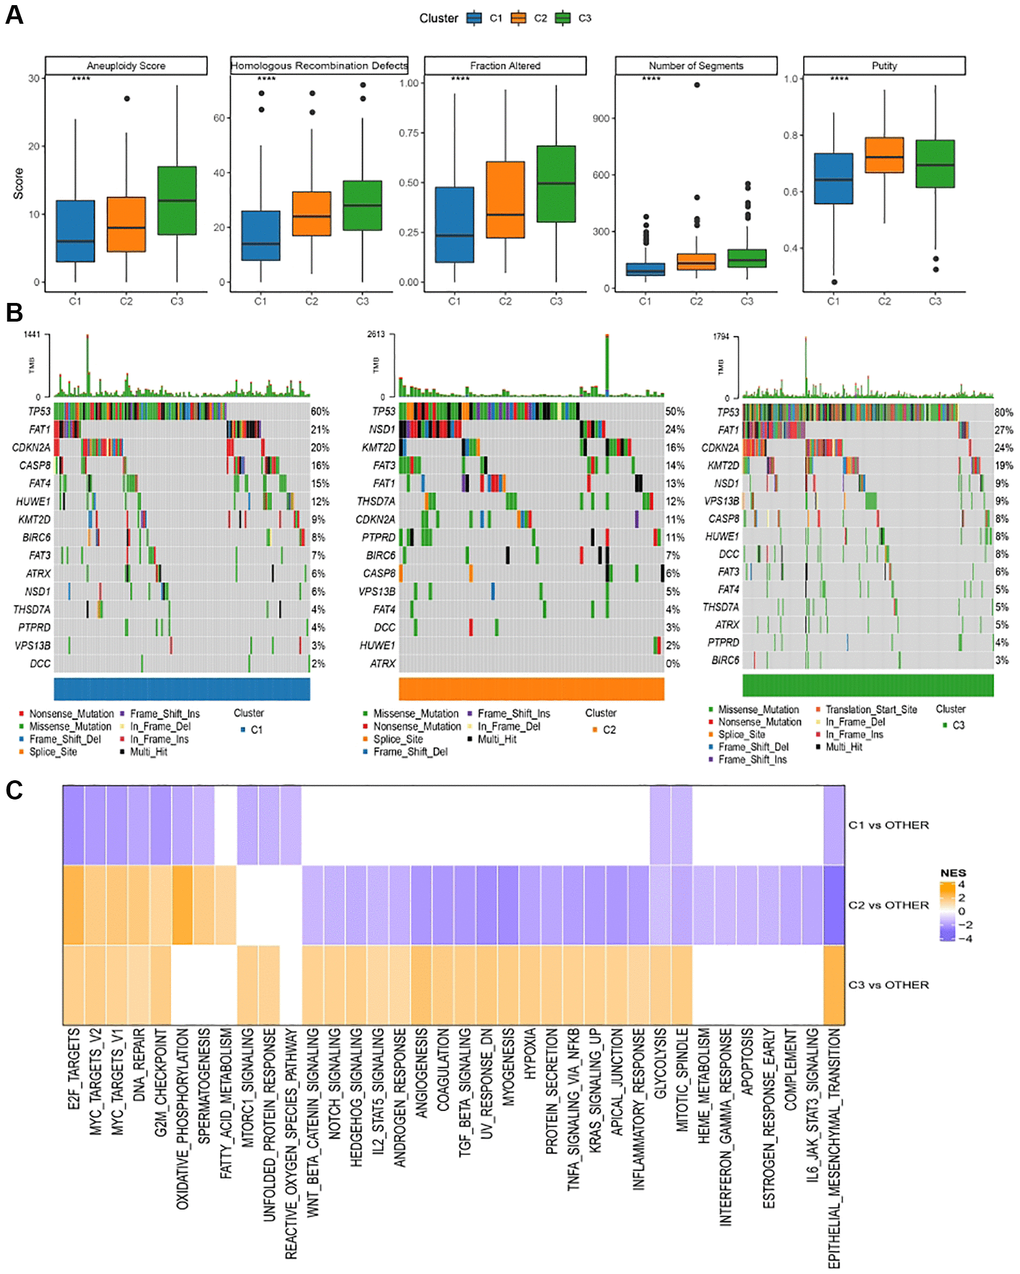 Genomic alterations in molecular subtypes of TCGA cohort. (A) Comparison of homologous recombination defects, aneuploidy score, fraction altered, number of segments, tumor purity in molecular subtypes of TCGA cohort differences; (B) Somatic mutations in the three molecular subtypes; (C) GSEA results among molecular subtypes of TCGA cohort.